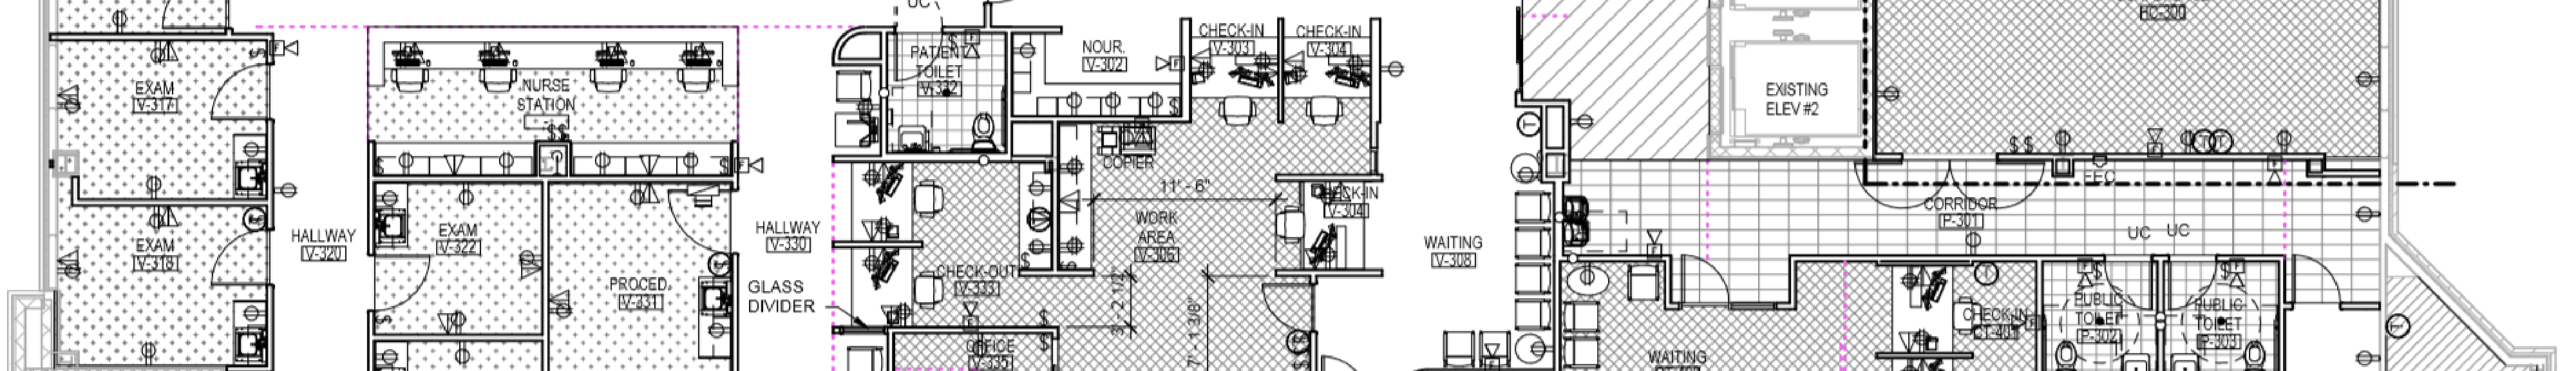 Commercial Shop Drawings